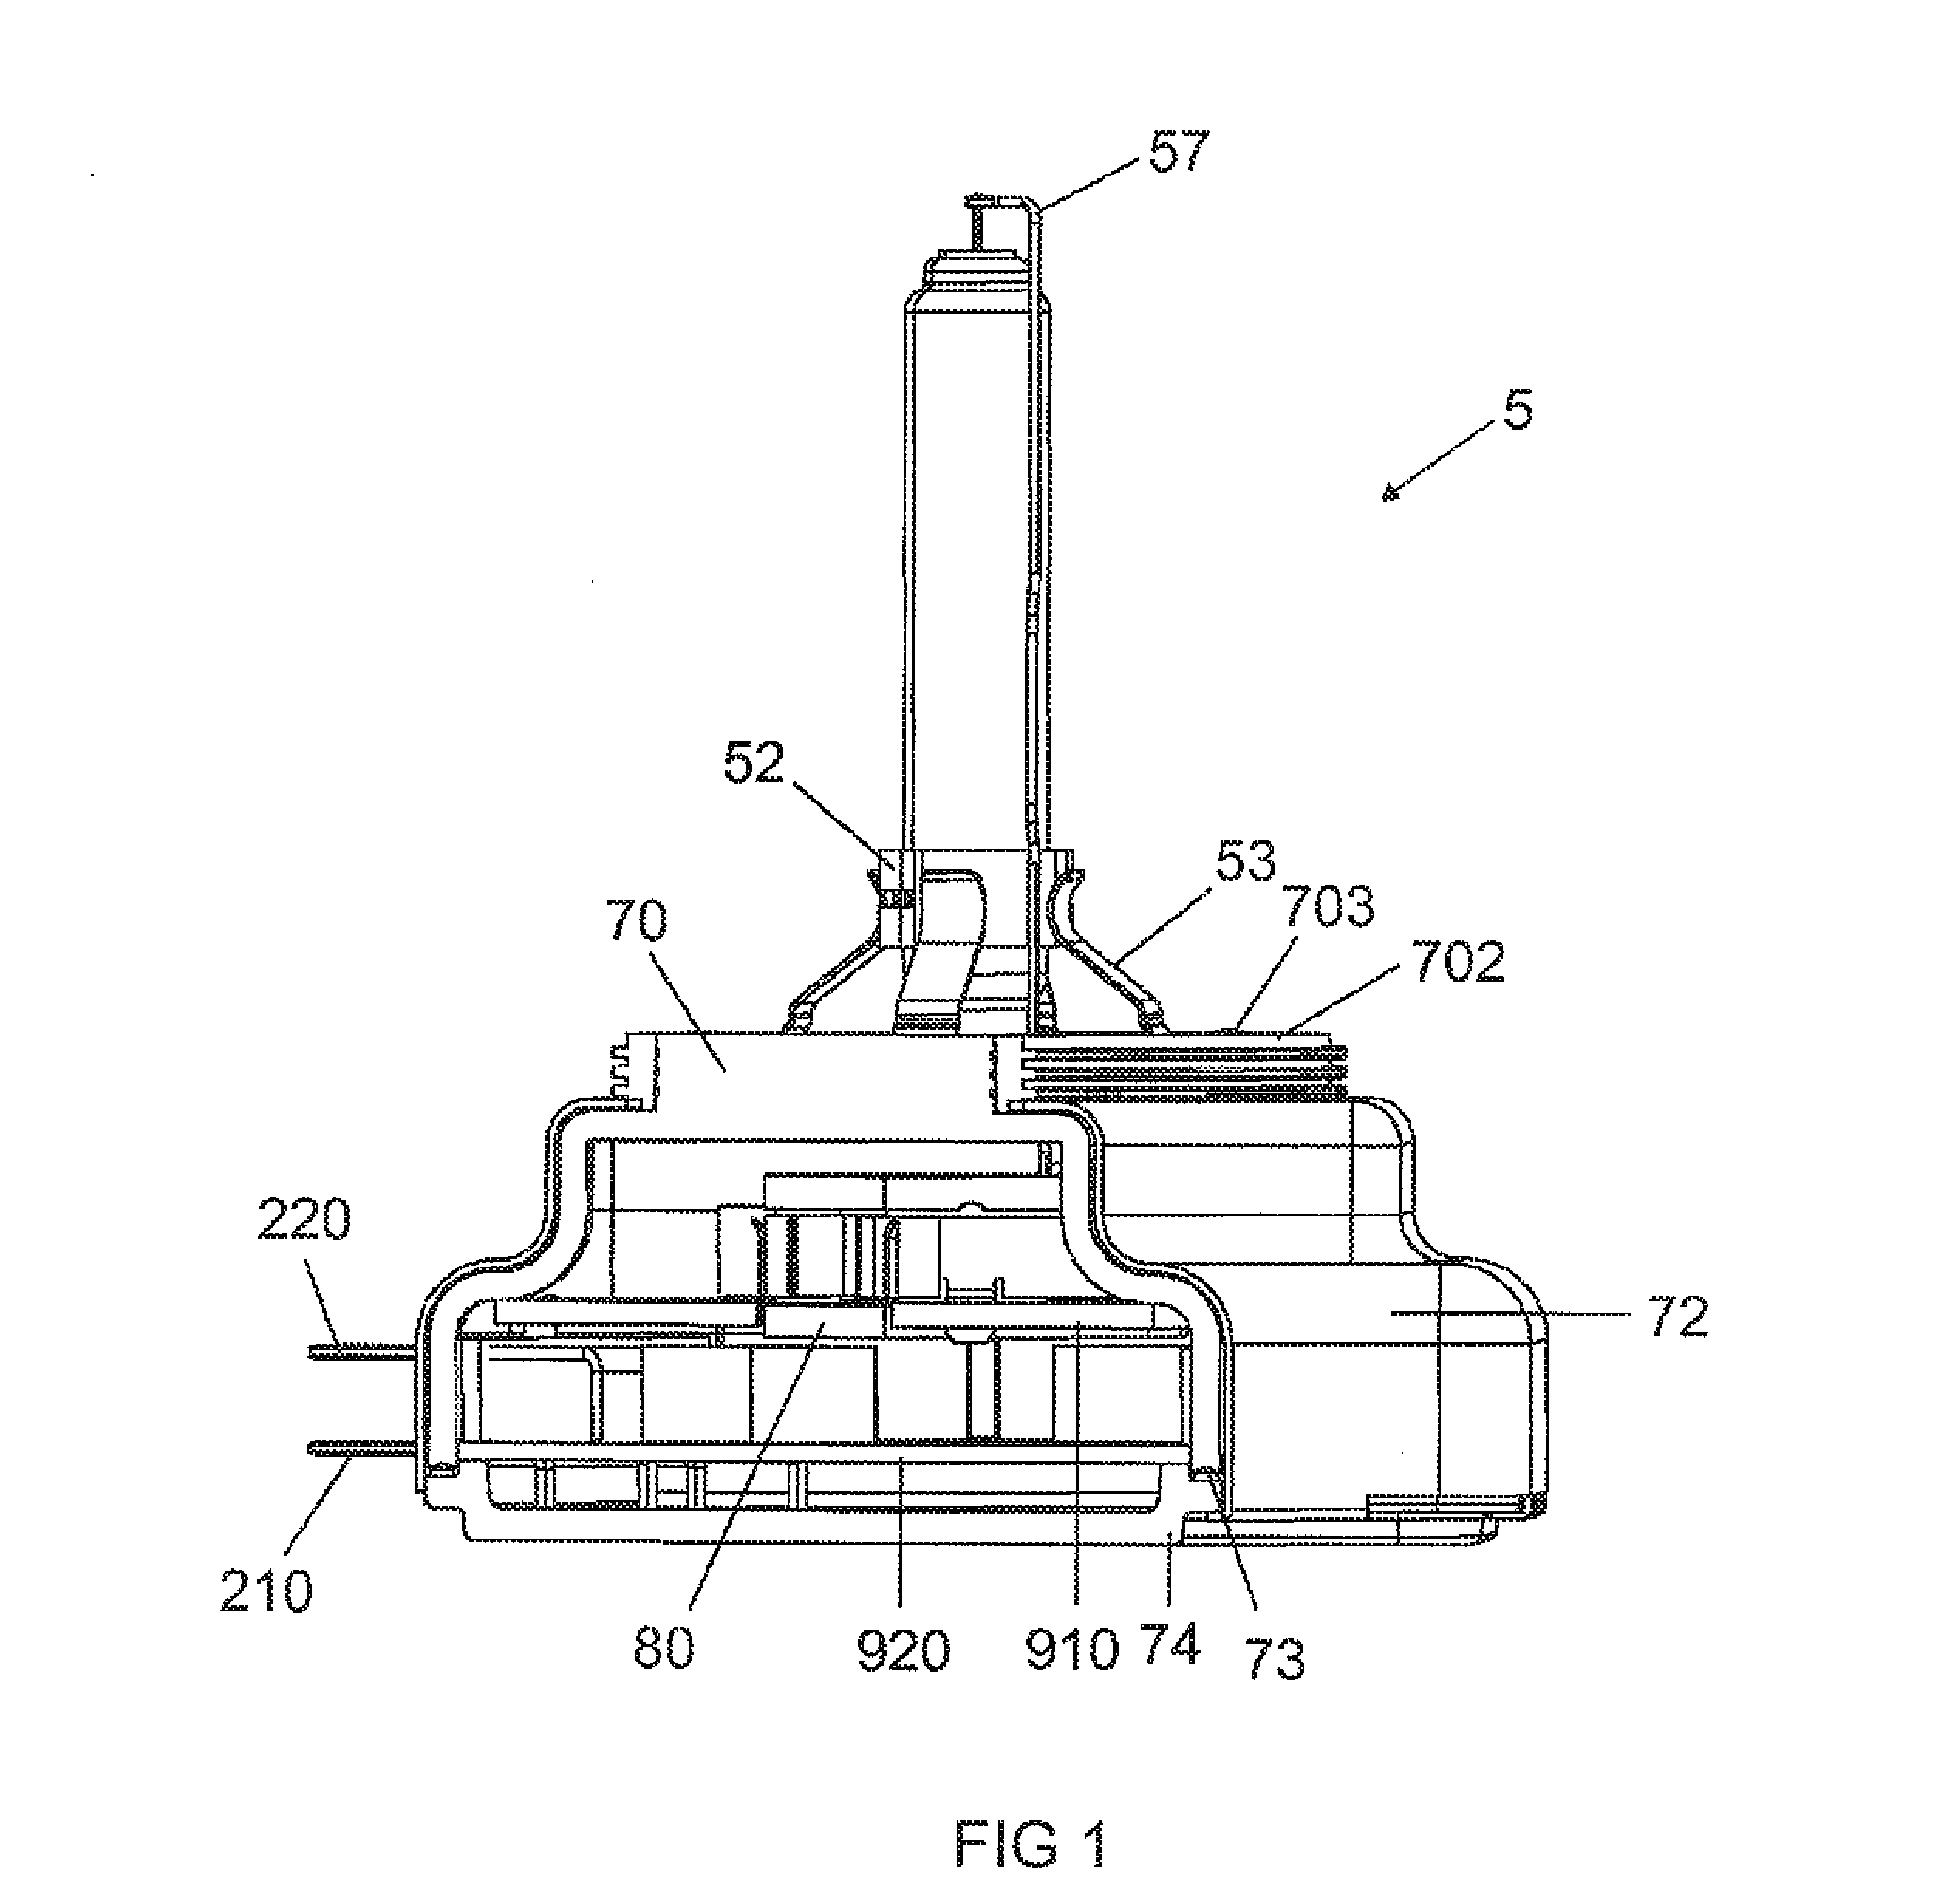 Integrated Gas Discharge Lamp with an Ignition Electronics Integrated Into the Base for Generating Asymmetrical Ignition Pulses